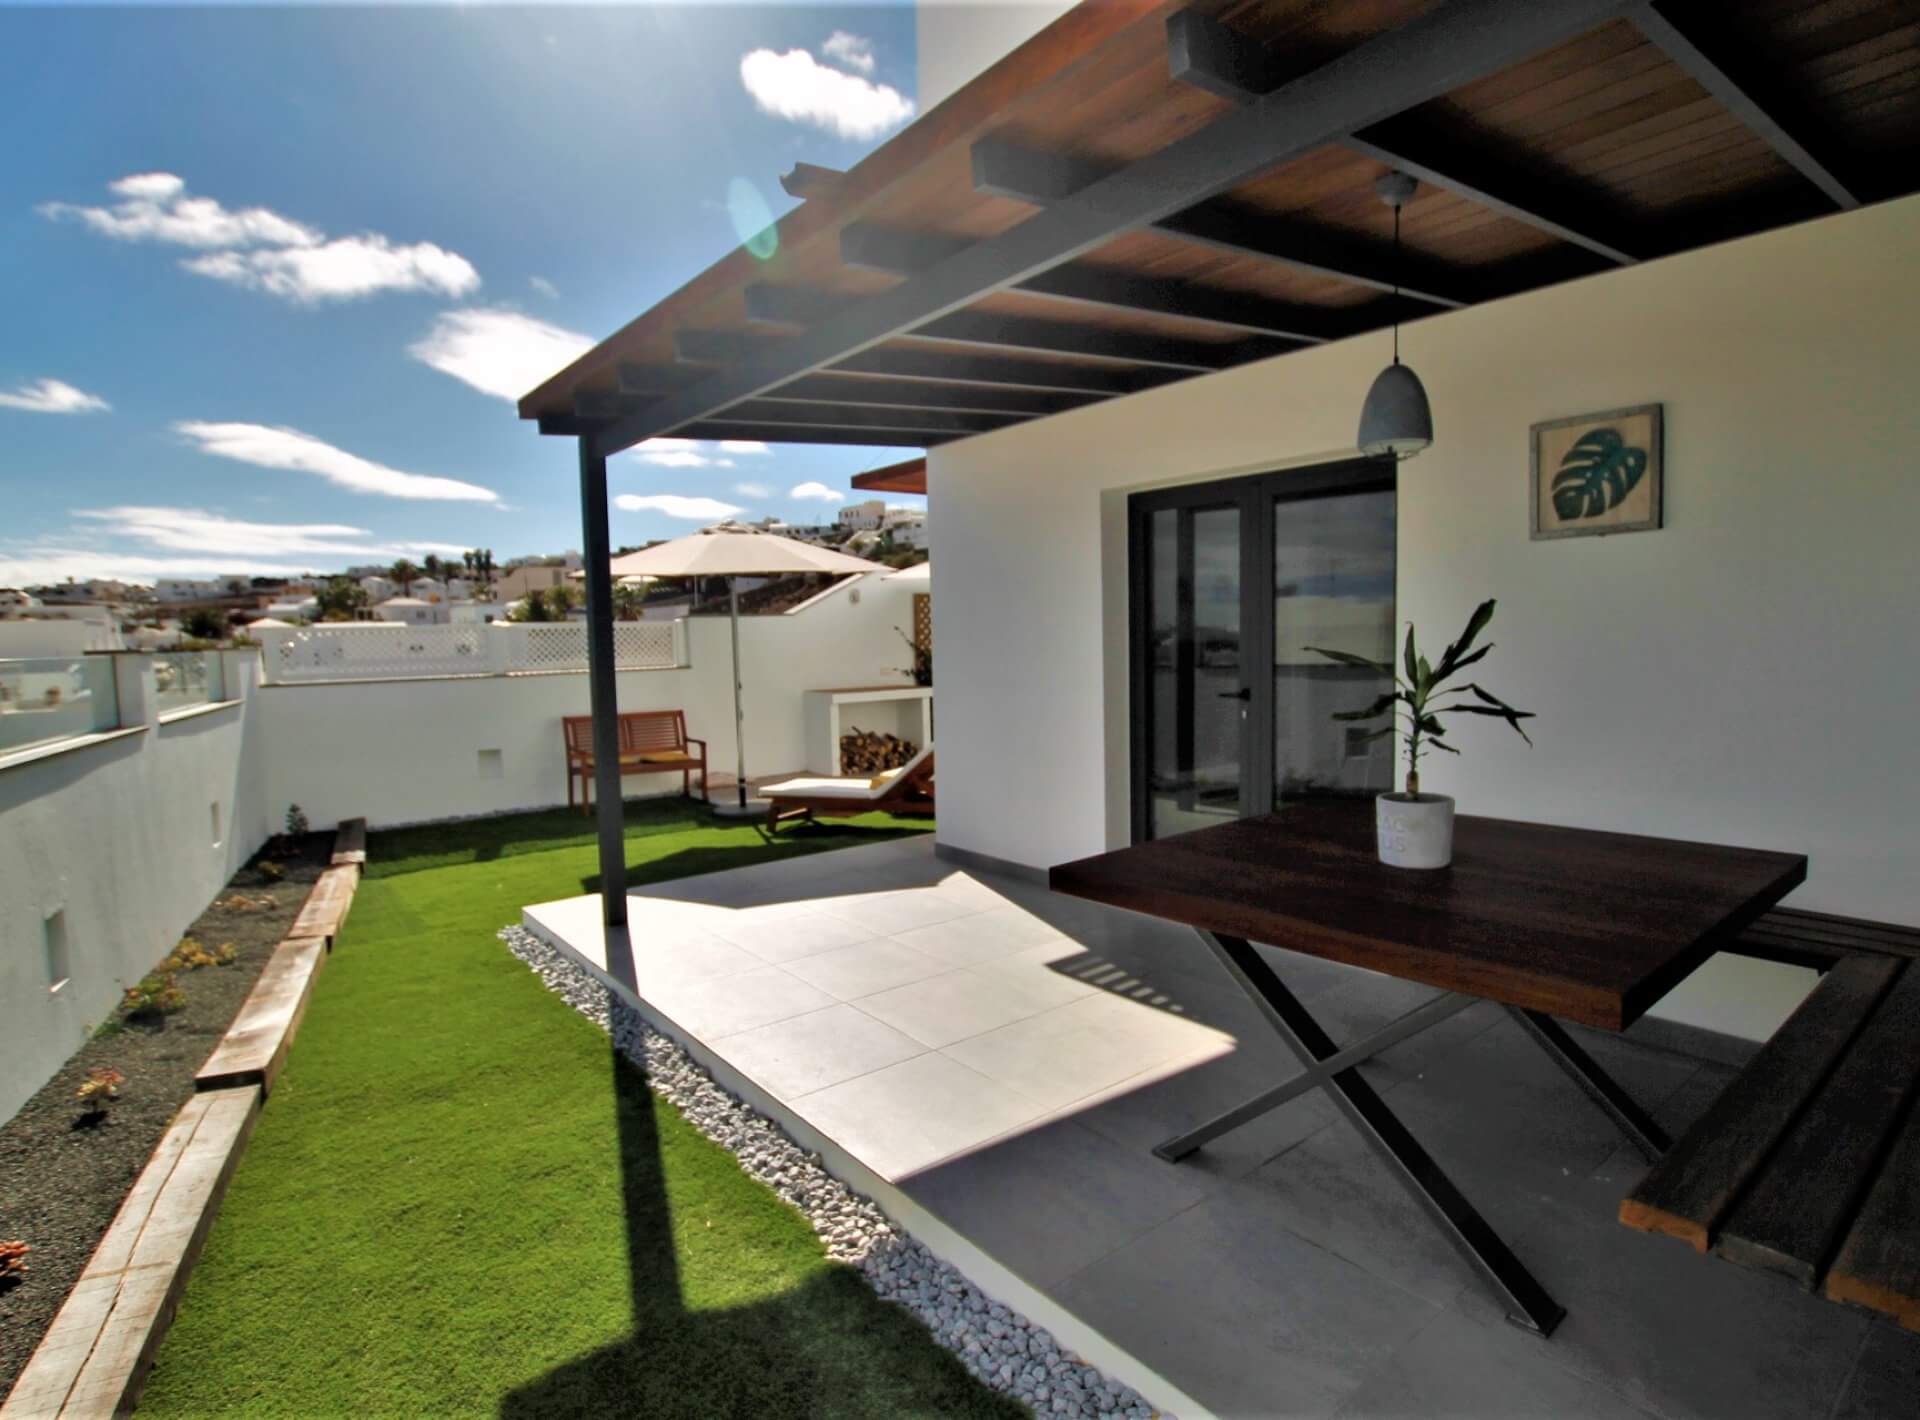 Holiday House and Spa Lanzarote